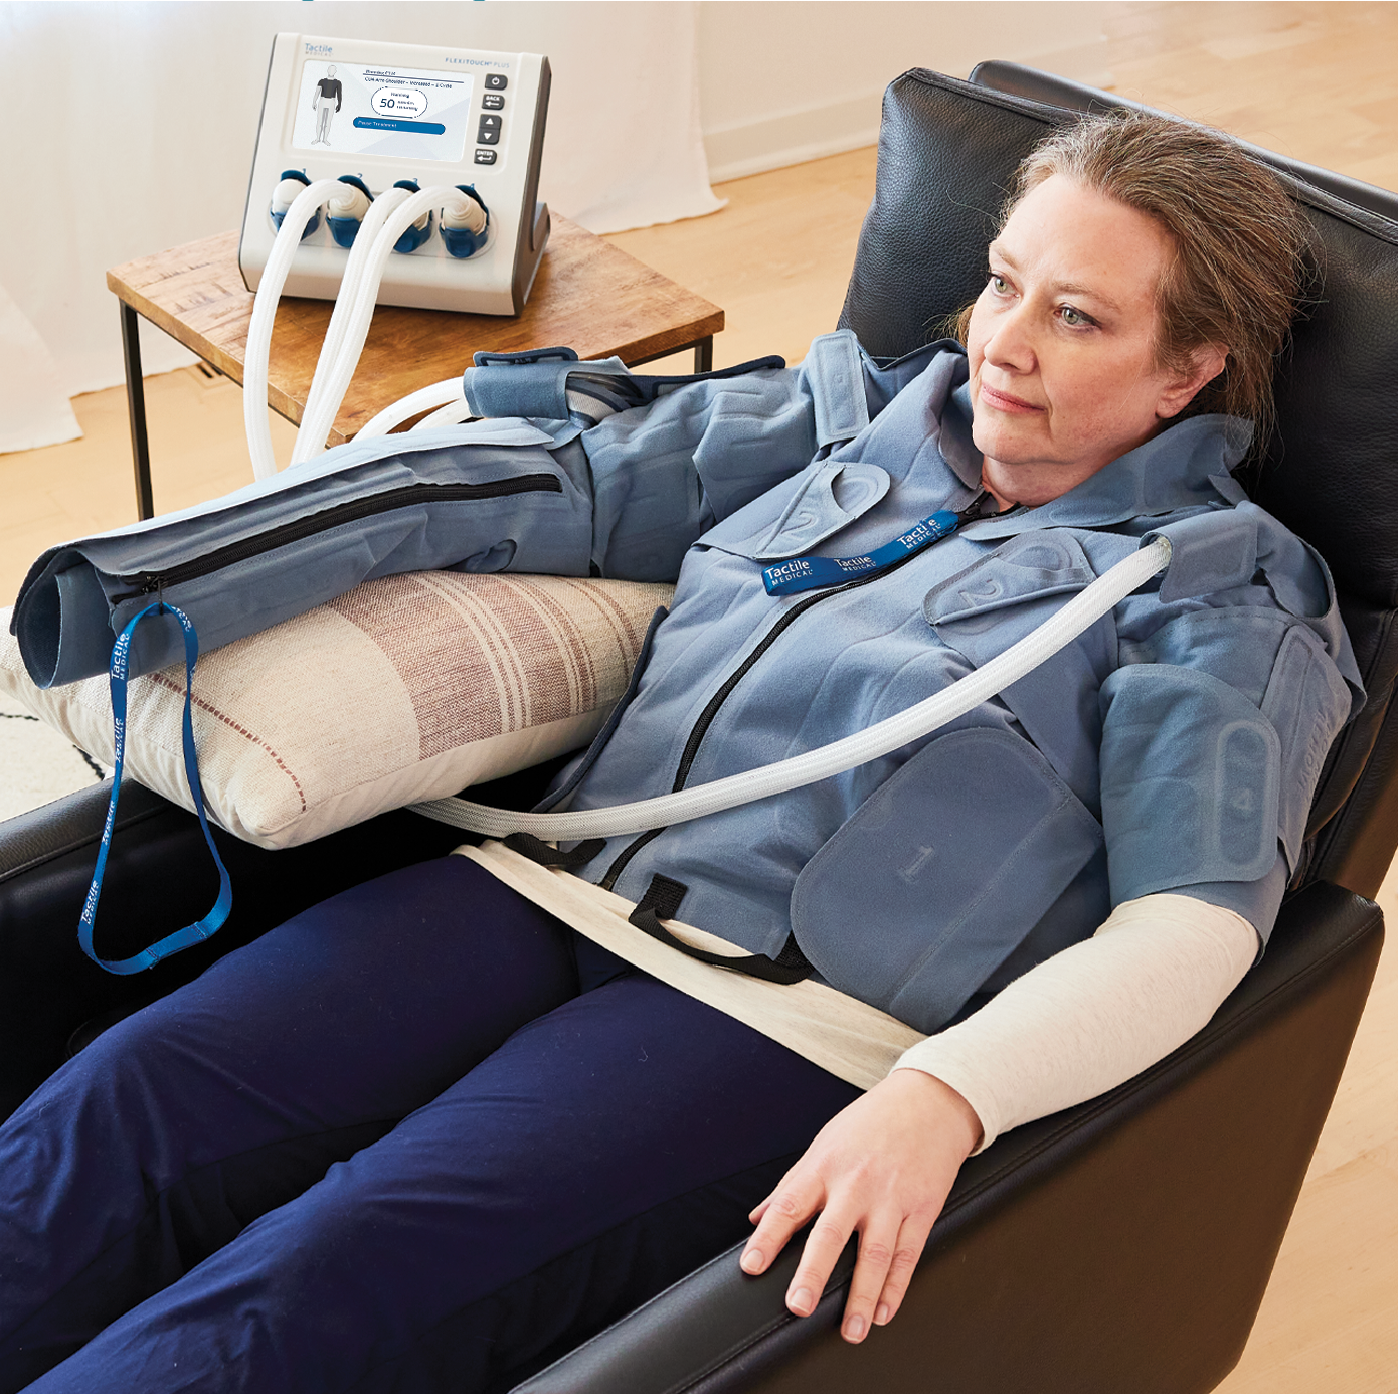 ADP authorizer for lymphedema compression garments - Movement